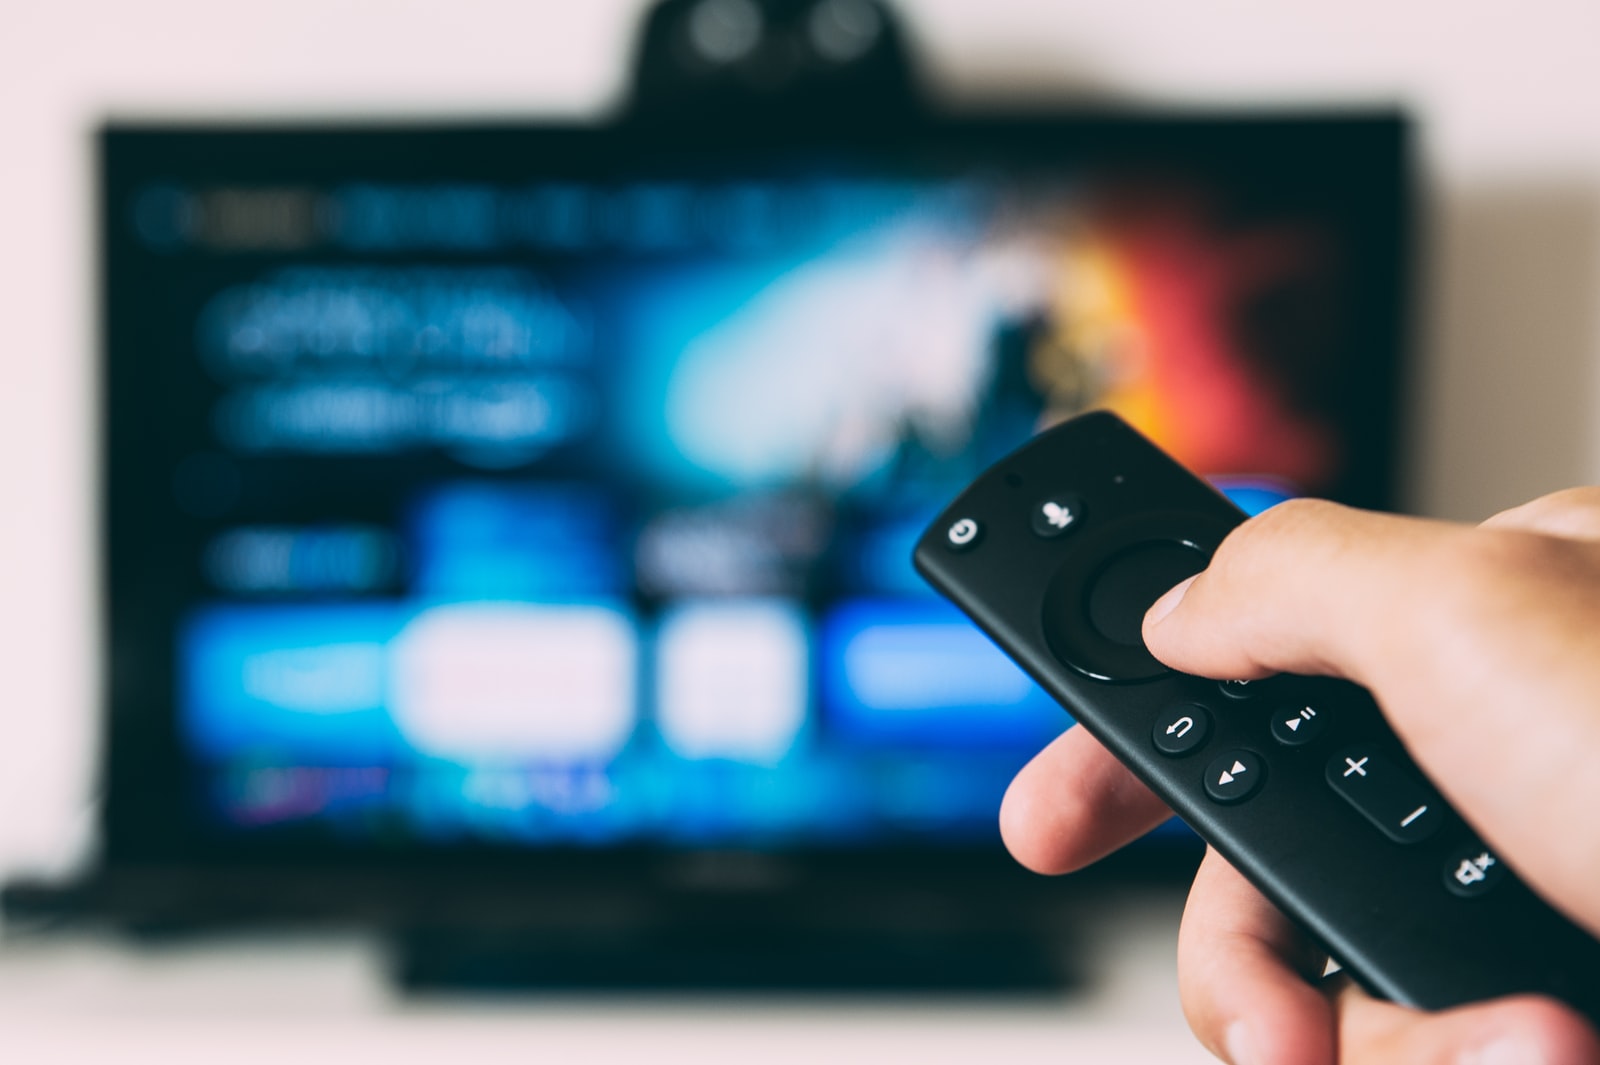 How to use an Amazon Fire TV Stick without the remote